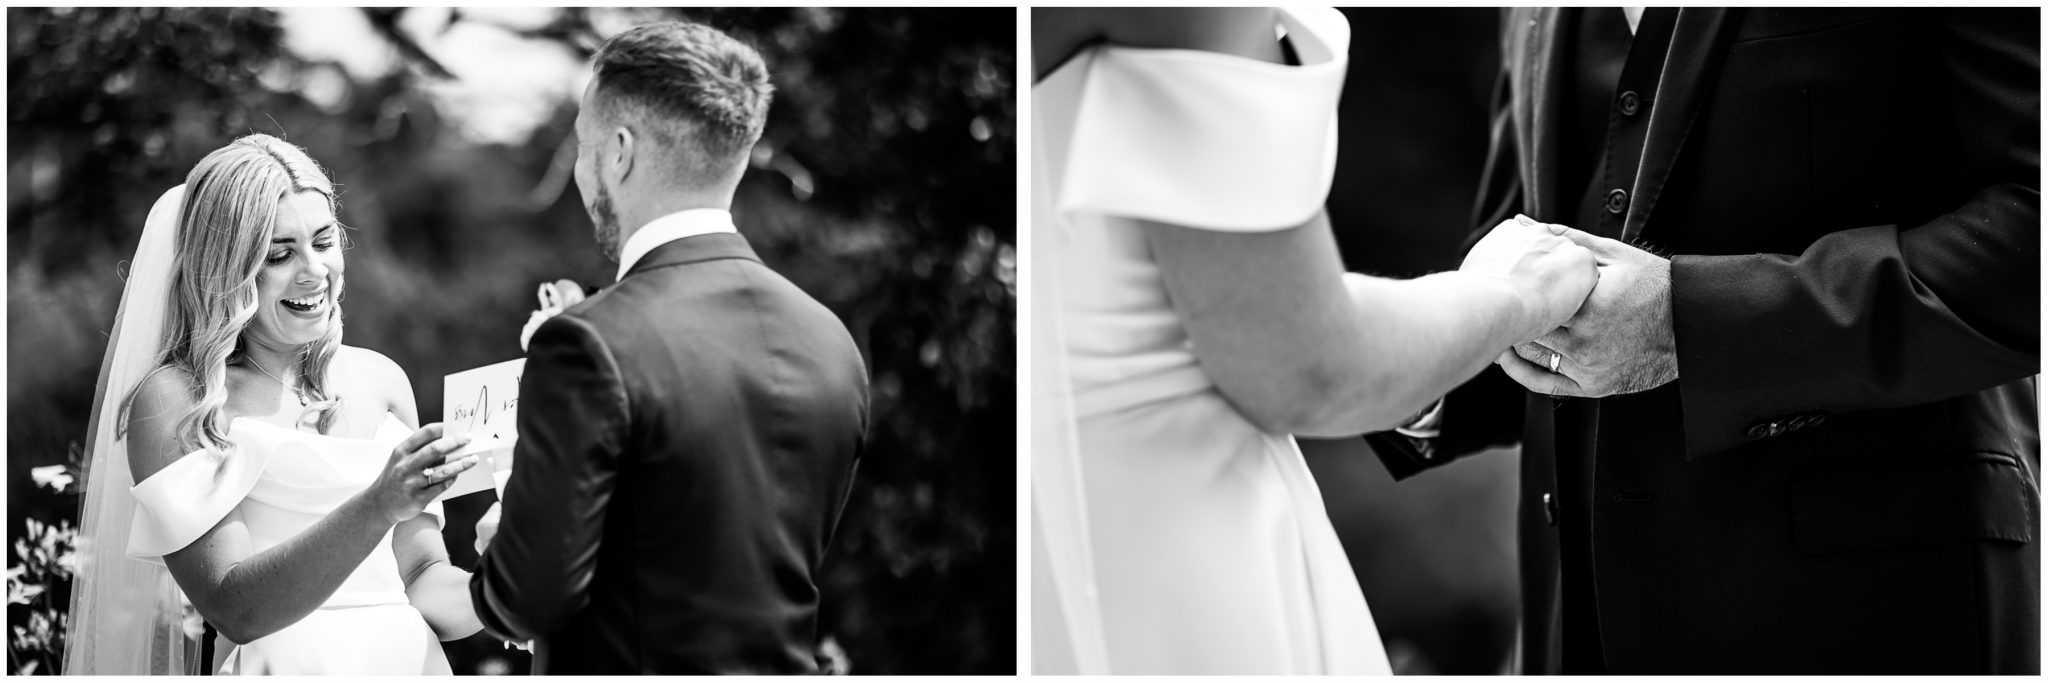 Black and white image of couple holding hands as the bride reads out her viws